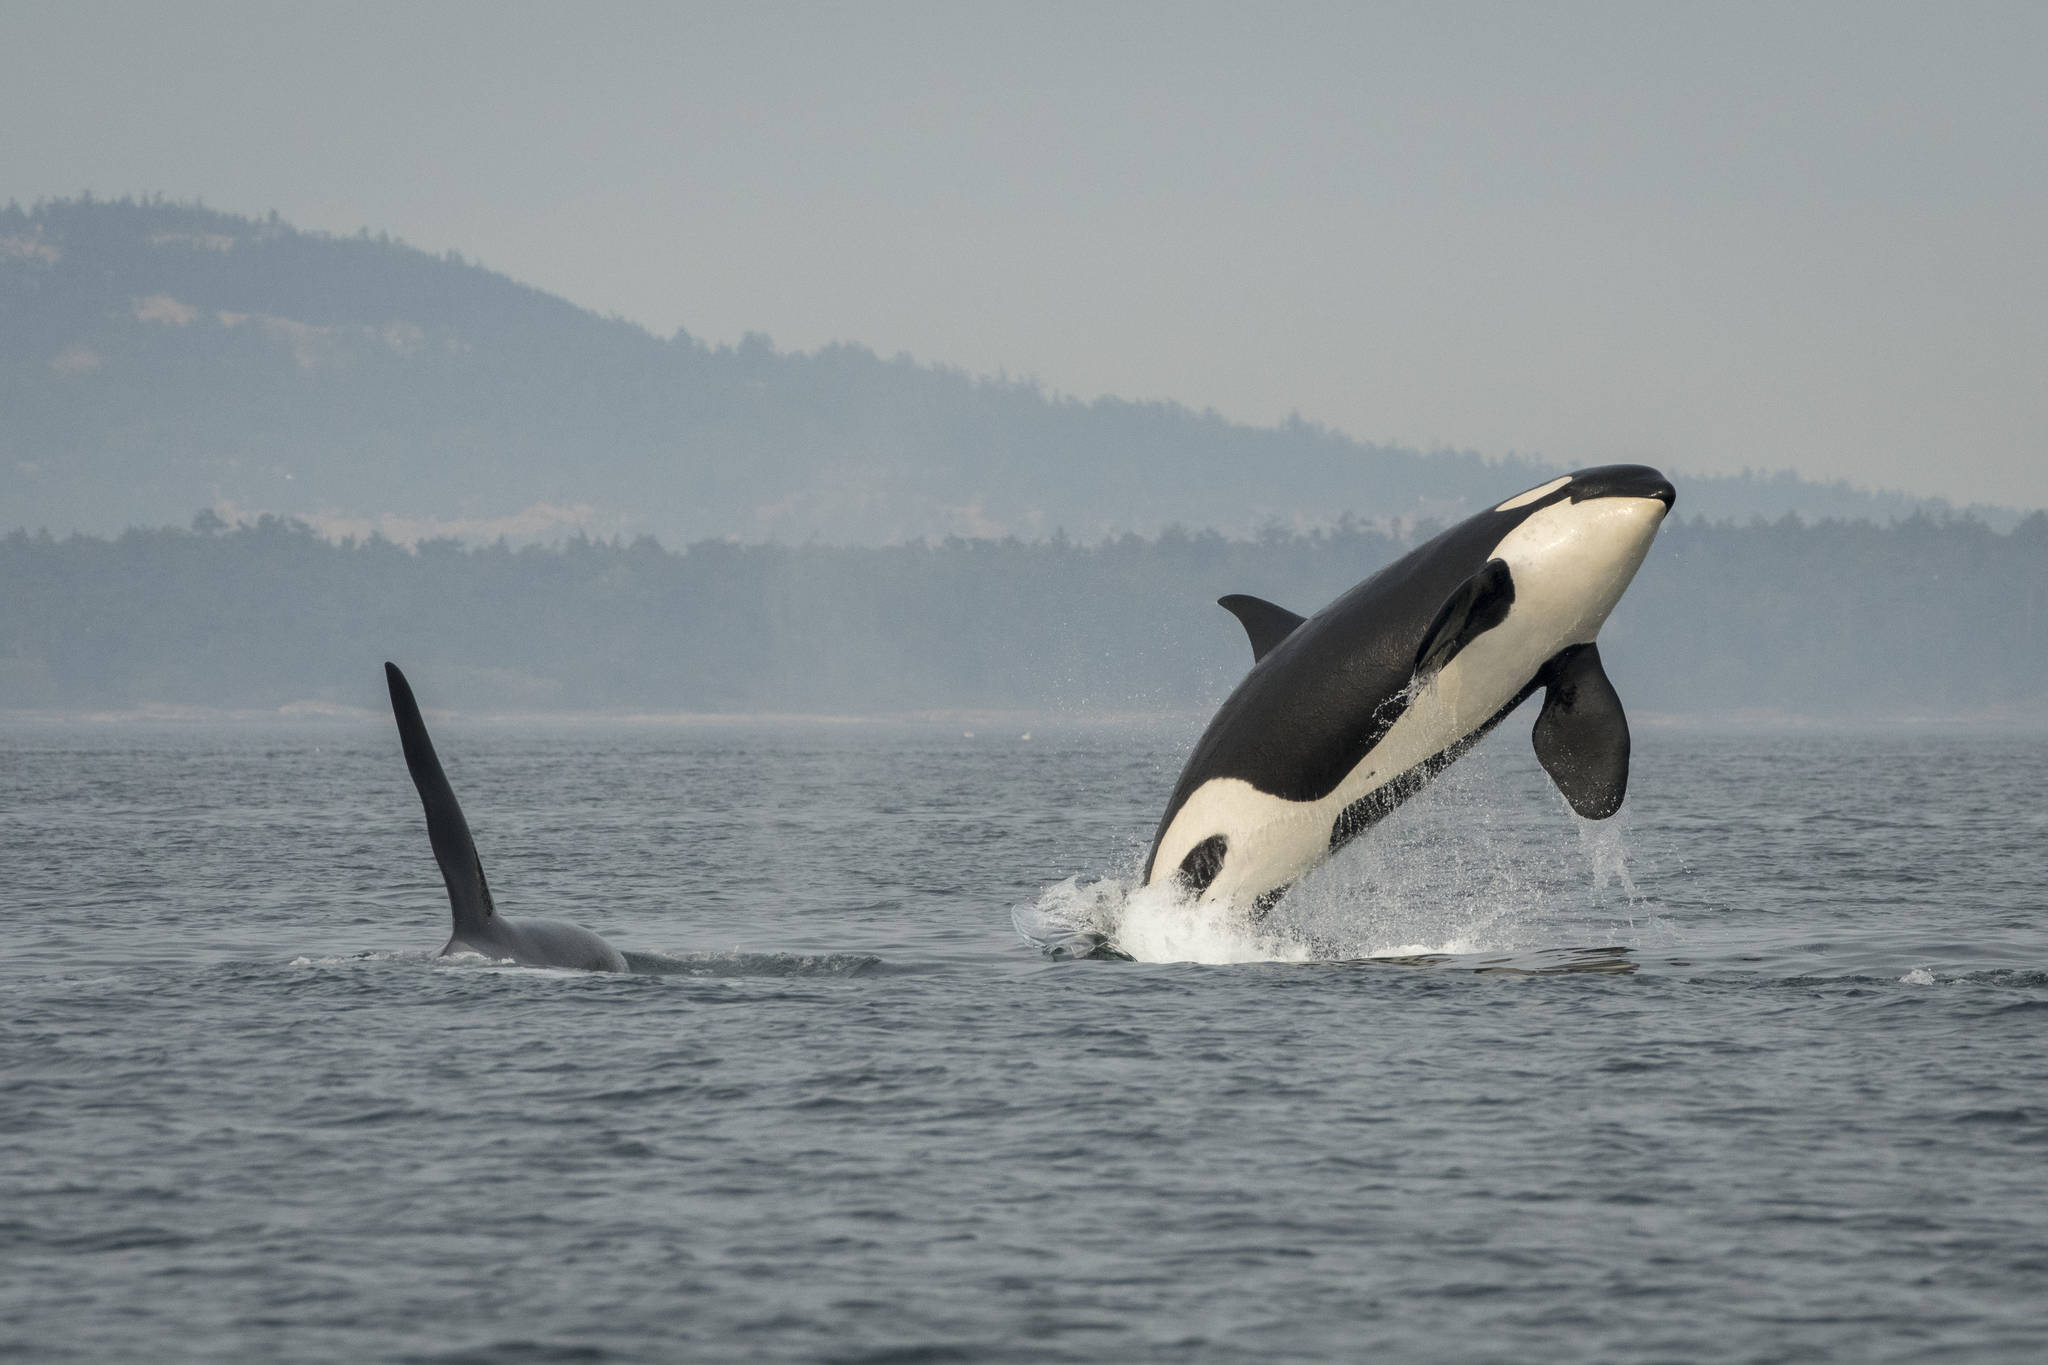 J26 (brother) with J16 (mother) breaching. (Photo: Katy Foster)